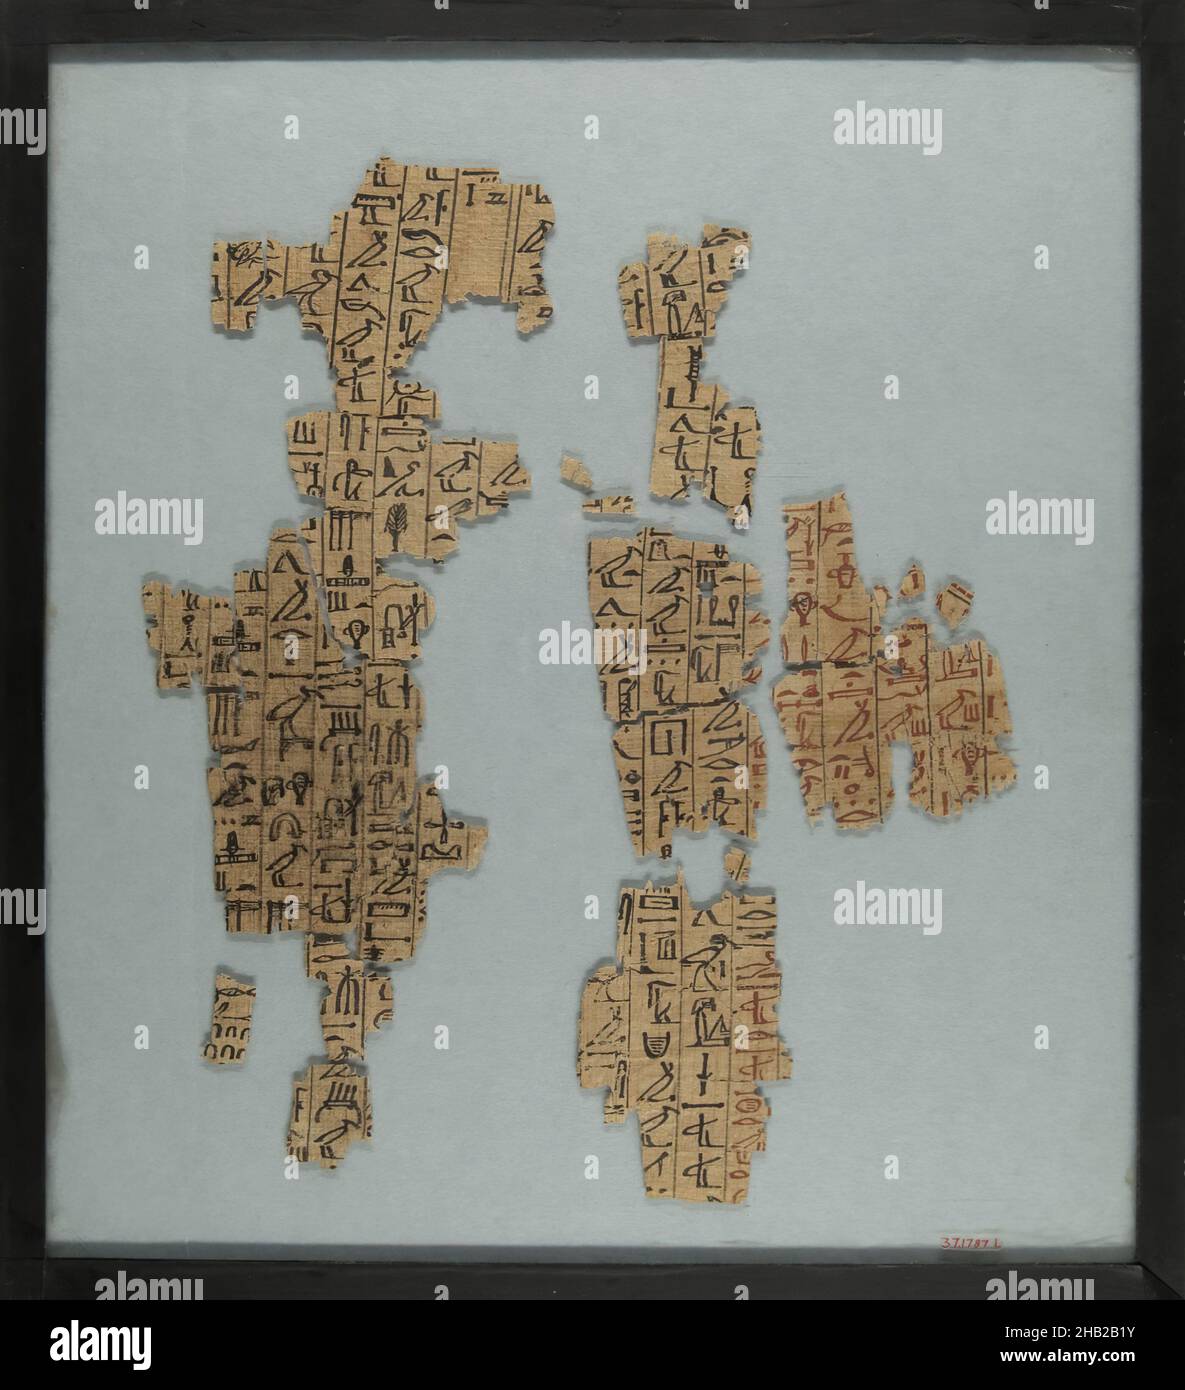 Fragments from a Book of the Dead, Papyrus, ink, ca. 1539-1190 B.C.E., early to mid Dynasty 18, New Kingdom, Glass: 12 3/16 x 13 1/2 in., 31 x 34.3 cm, ancient, Book of Dead, Book of the Dead, Ceremonial Implements, Dynasty 18, egypt, egyptian, fragments, heiroglyph, New Kingdom, new york historical society collection, papyri, papyrus, XVIII Dynasty, Alabaster, Bowl, Dynastic Period, Egypt, Egyptia, Bronze, Deity, egypt, egyptian, Female, Goddess, Late Period, Left leg advanced, Metal, Nephthys, new york historical society collection, Sculpture, Standing, statue, Statuette, Walking Stock Photo